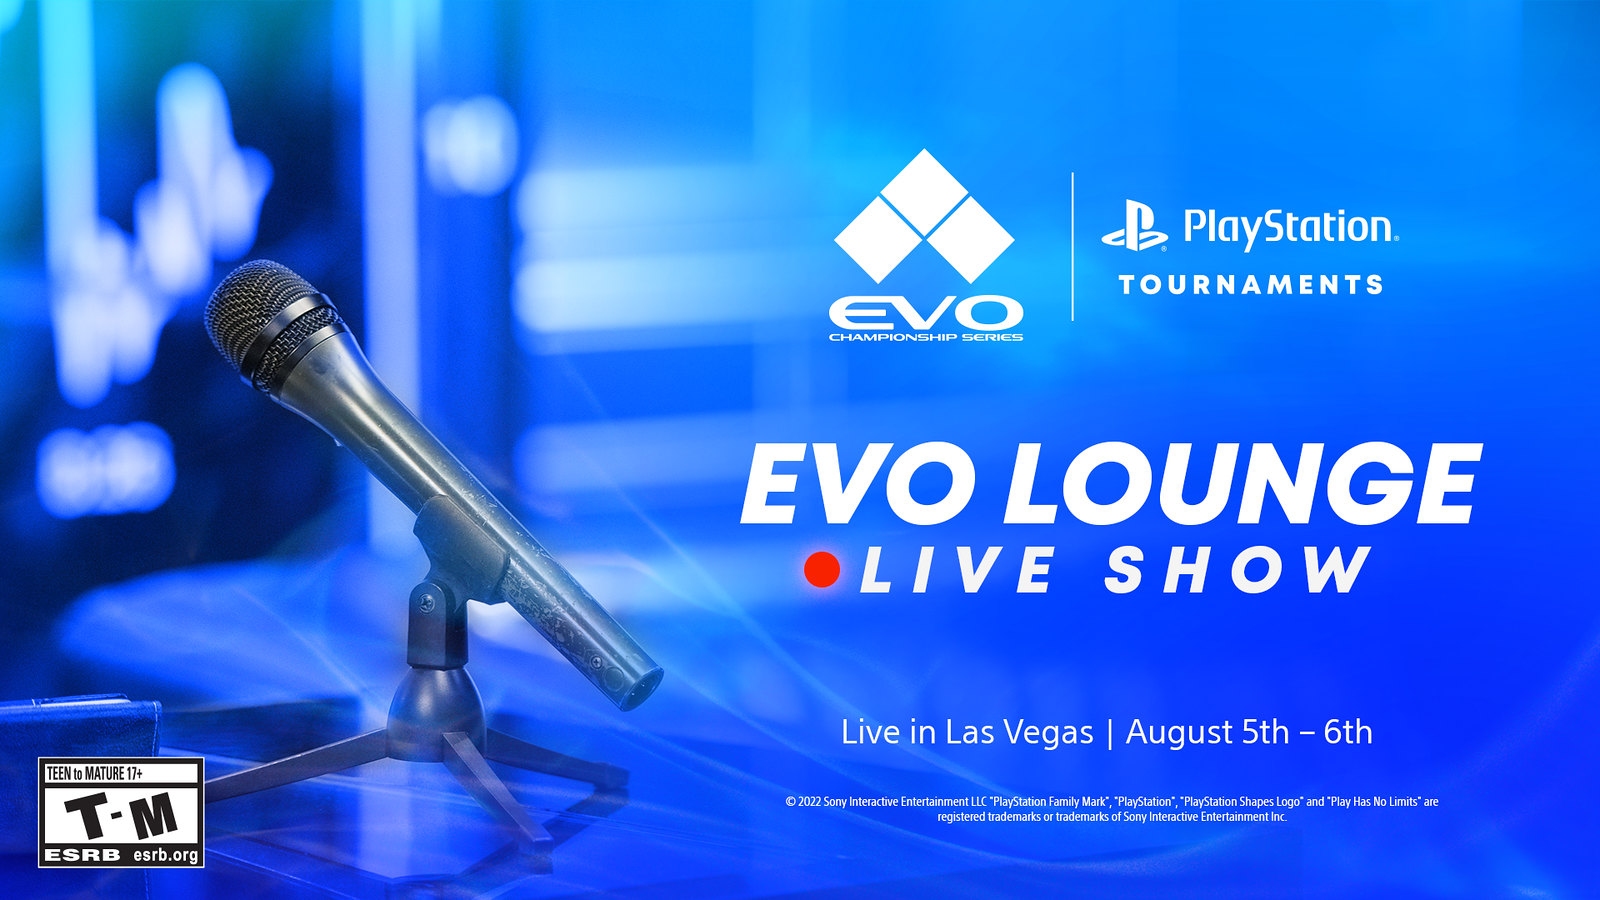 Where to Watch Sony's The Evo Lounge Live Show